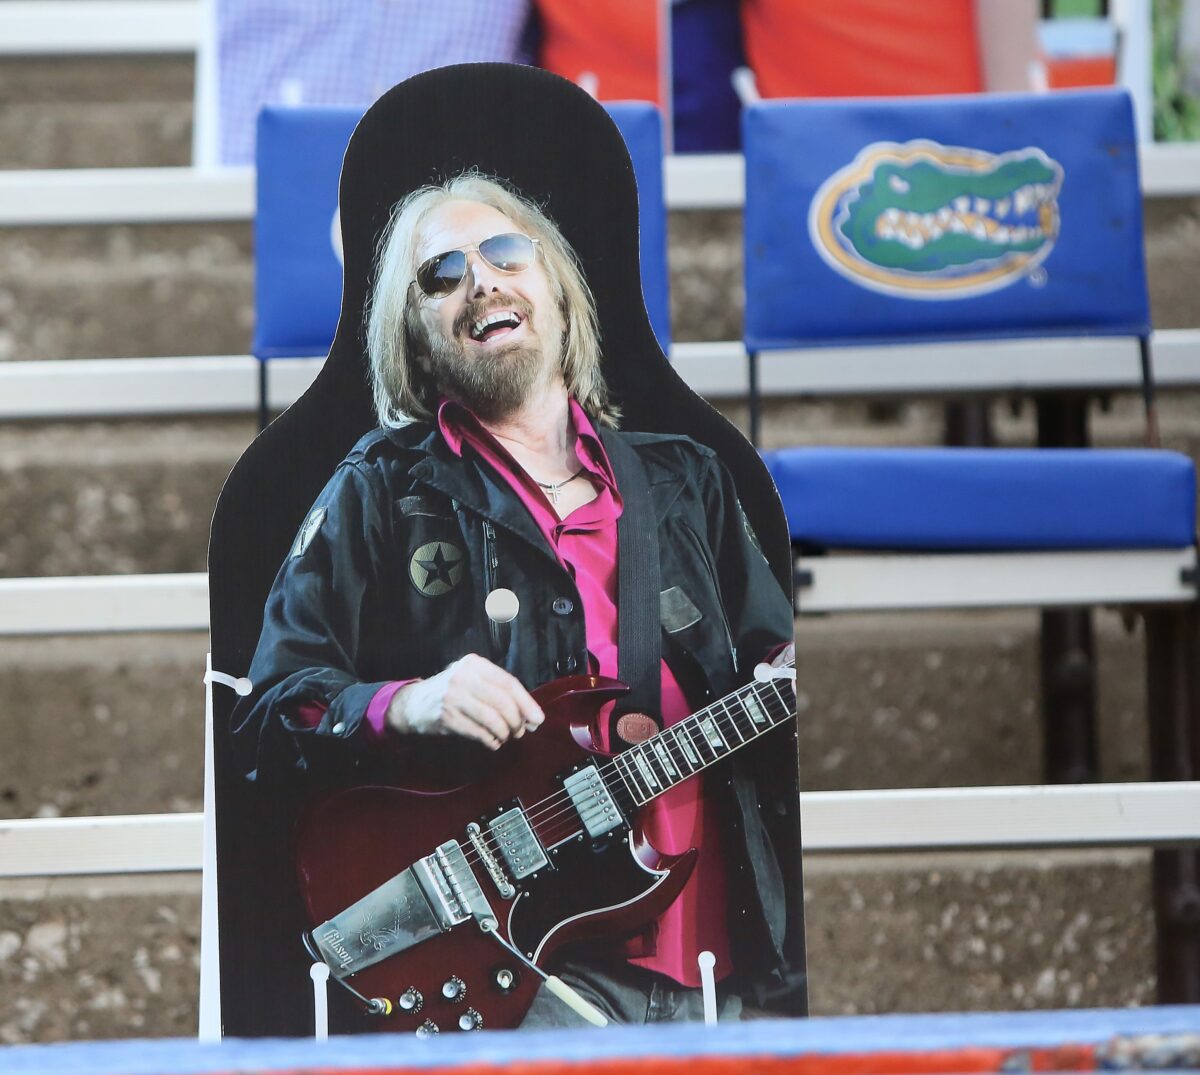 Florida Gators with stirring hype video for Tom Petty Day